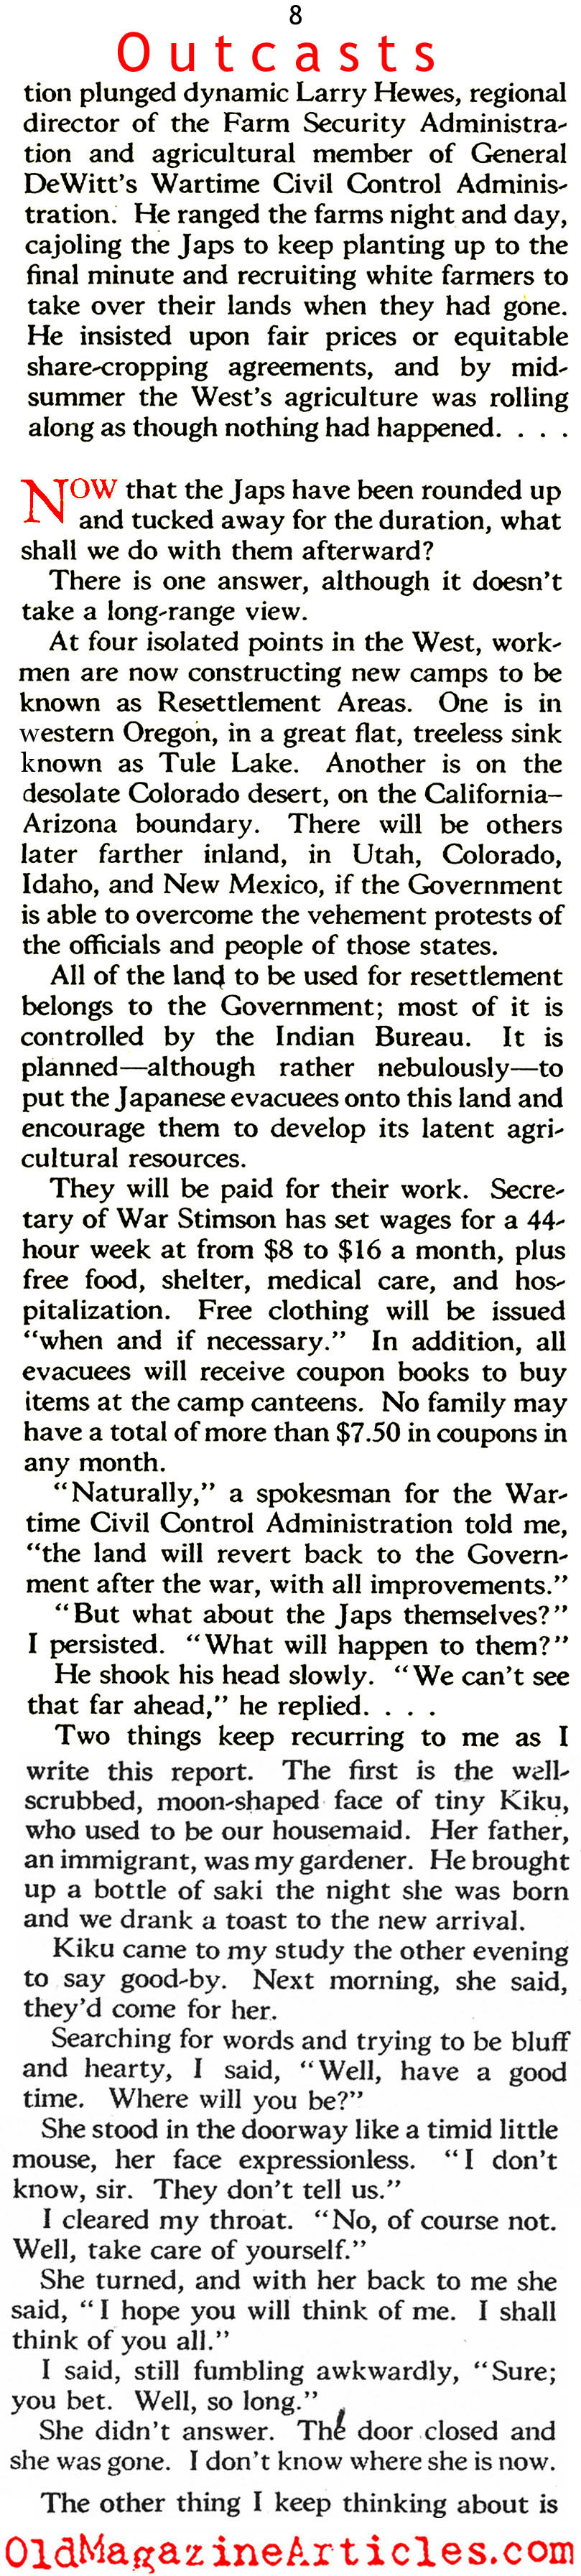 The Outcast Americans (American Magazine, 1942)